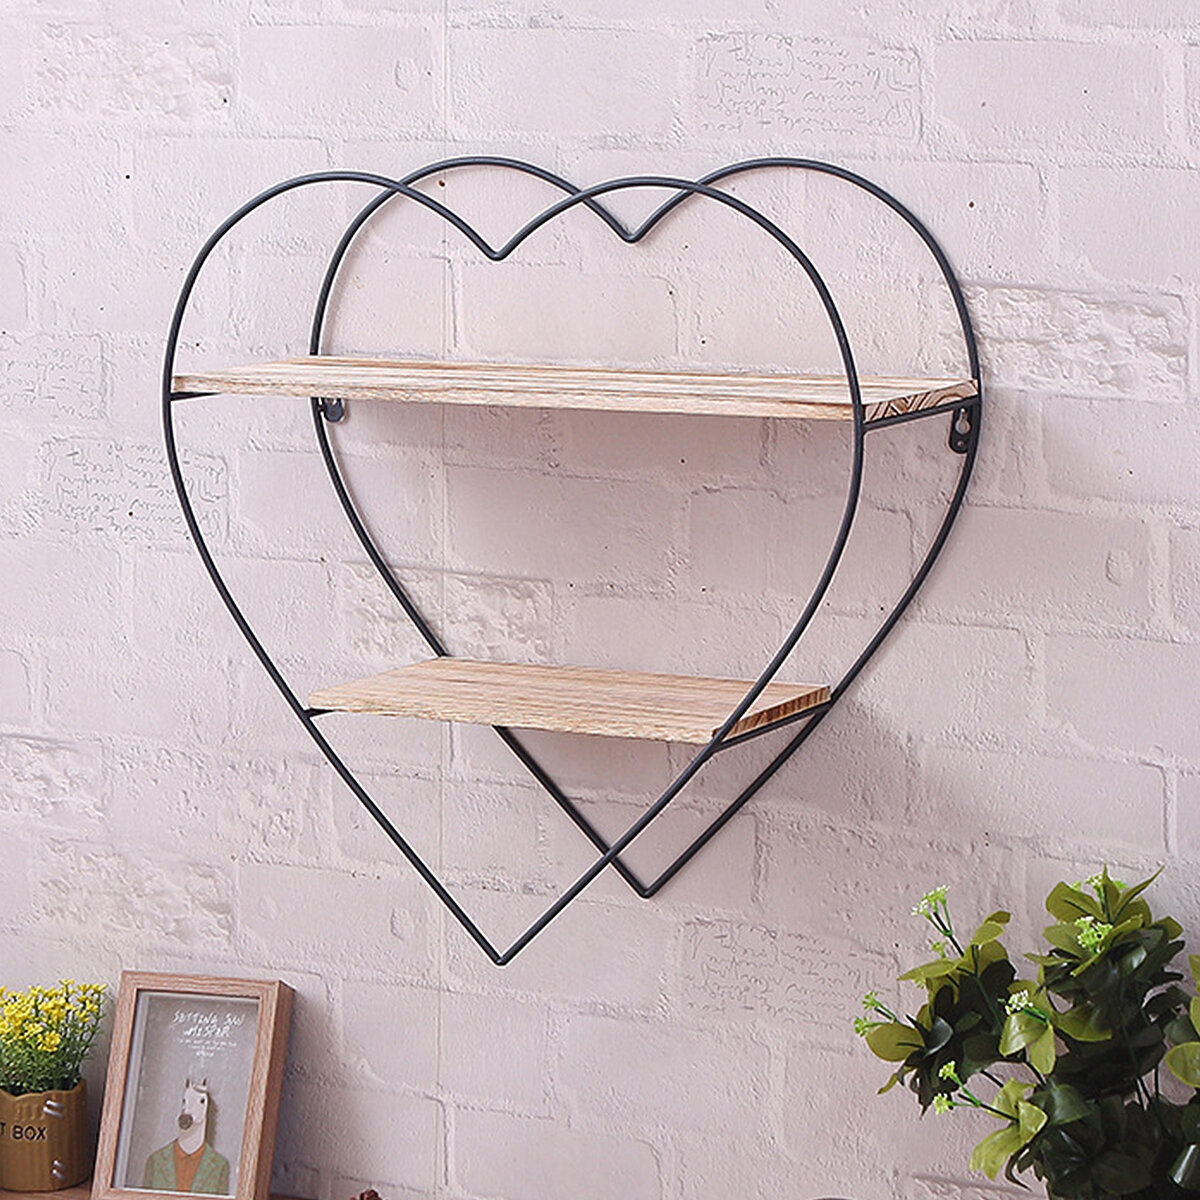 Heart-shaped Wooden Wall Shelf 2 Layers Vintage Storage Wall Mounted Display Floating Rack for Kitchen Living Room Office COD